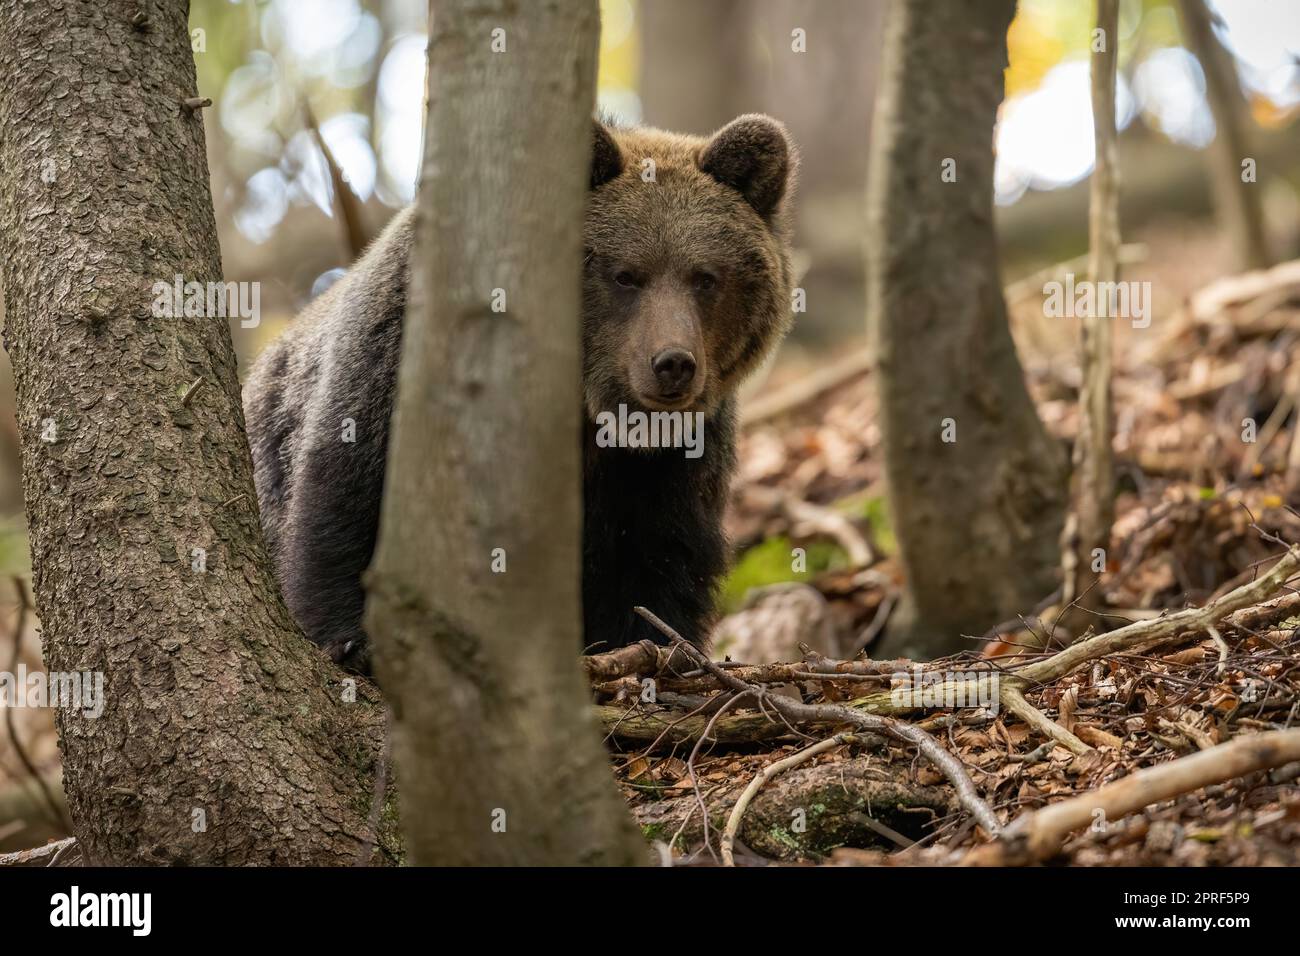 Brown bear hiding behind a tree in woodland with copy space. Stock Photo